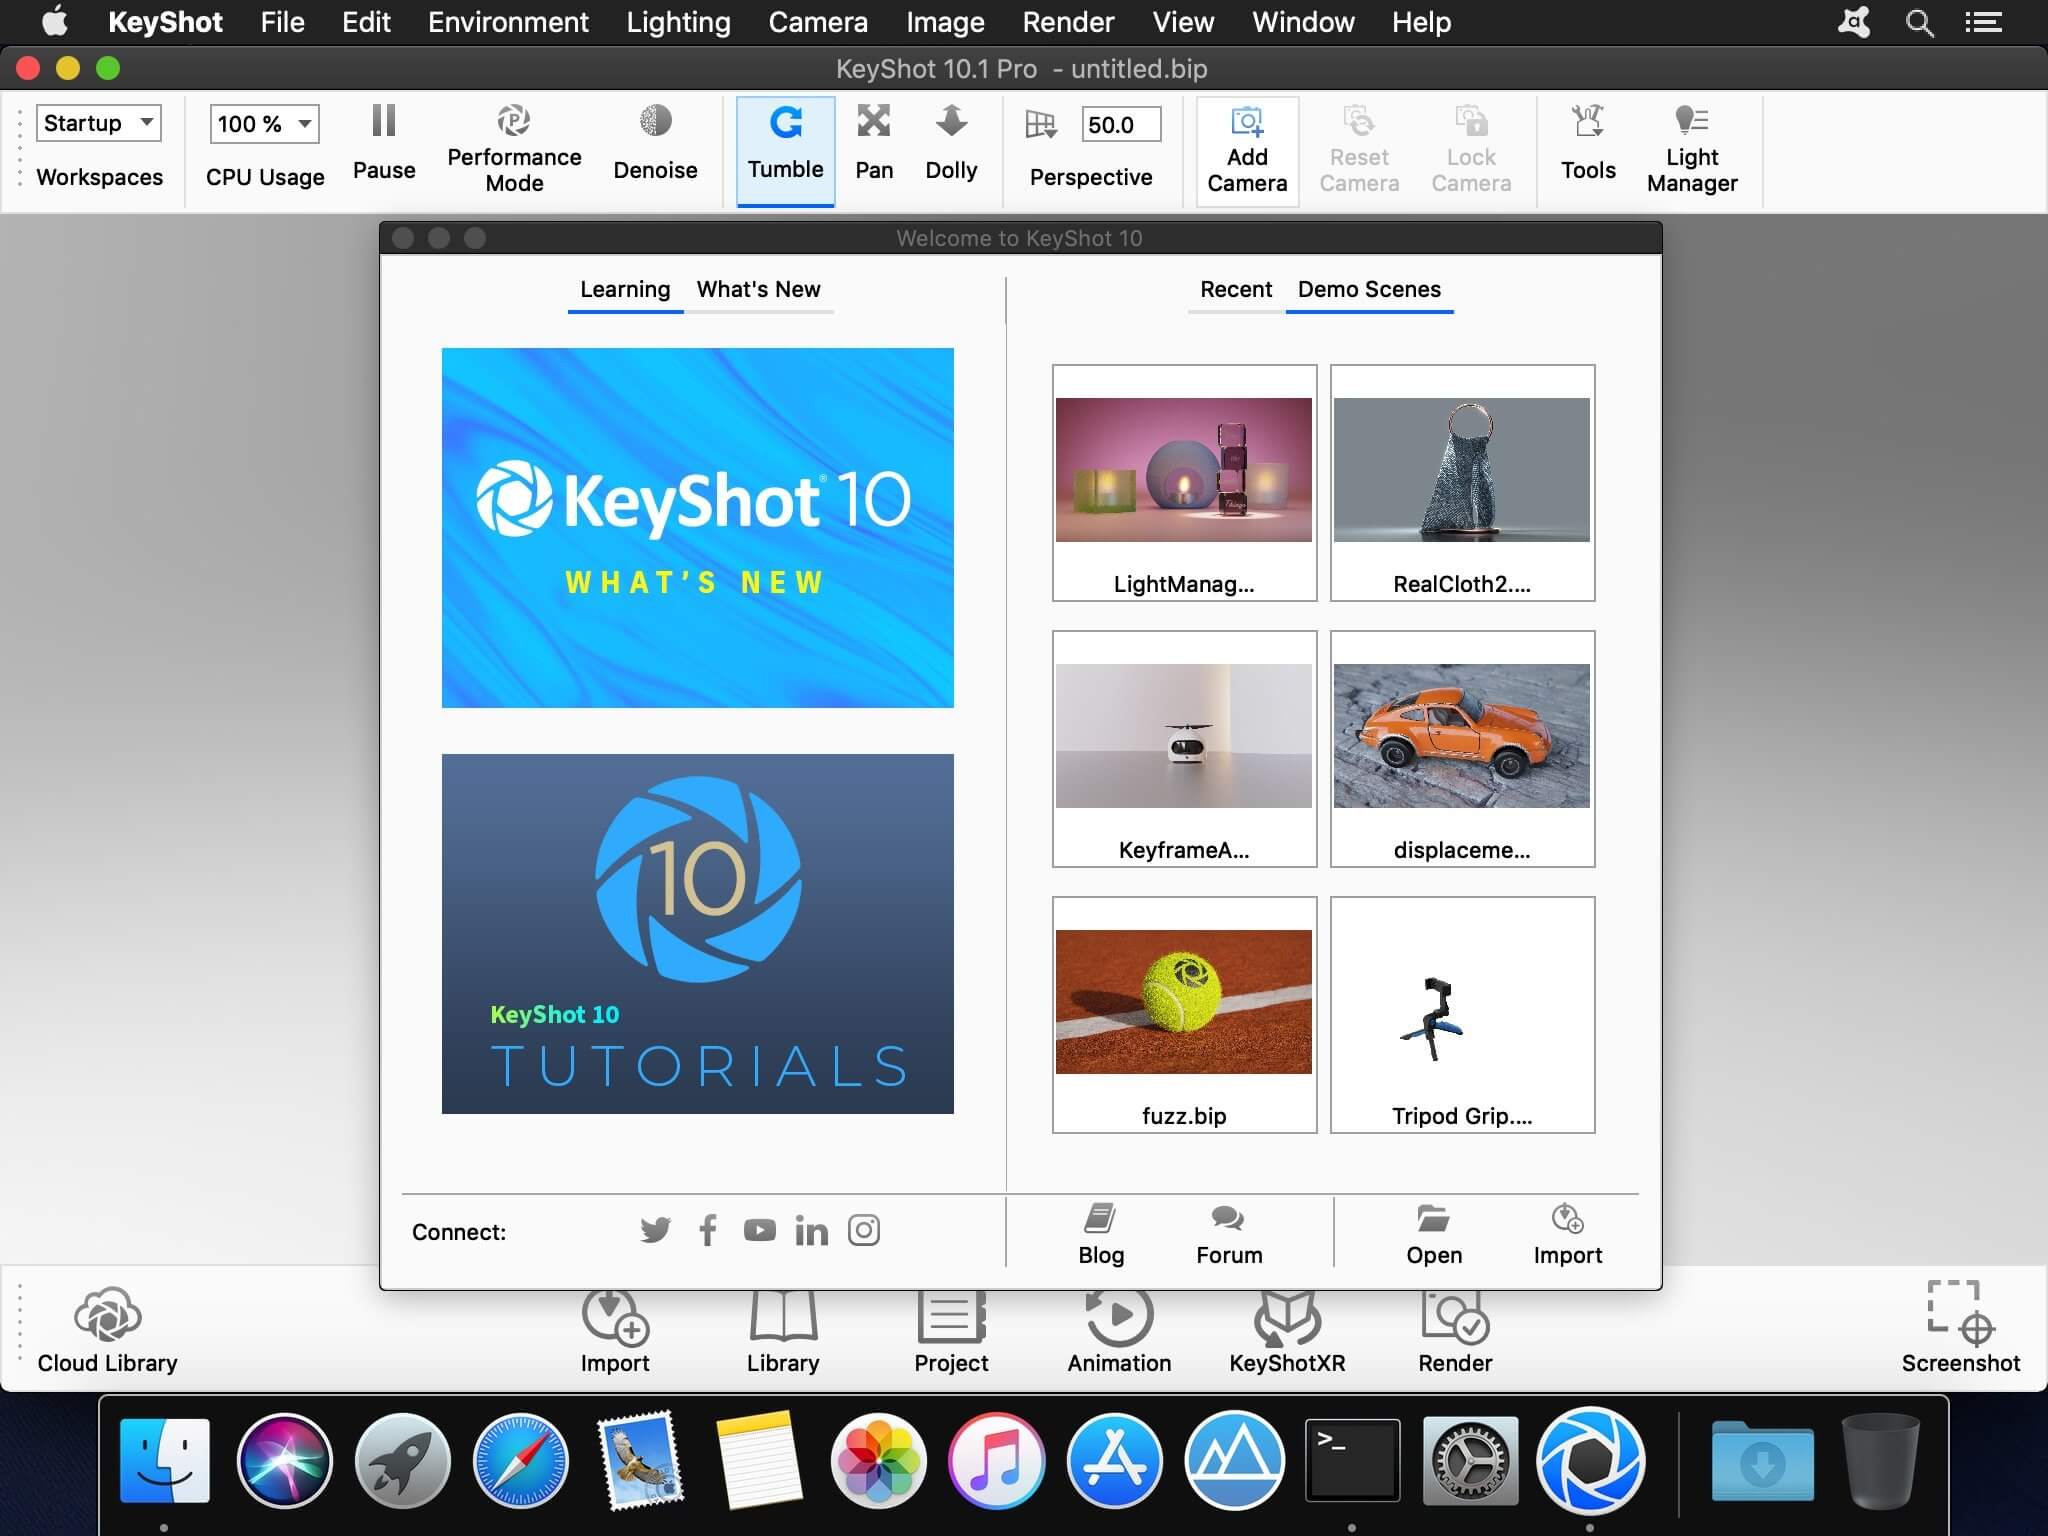 download the last version for android Luxion Keyshot Pro 2023 v12.1.1.6